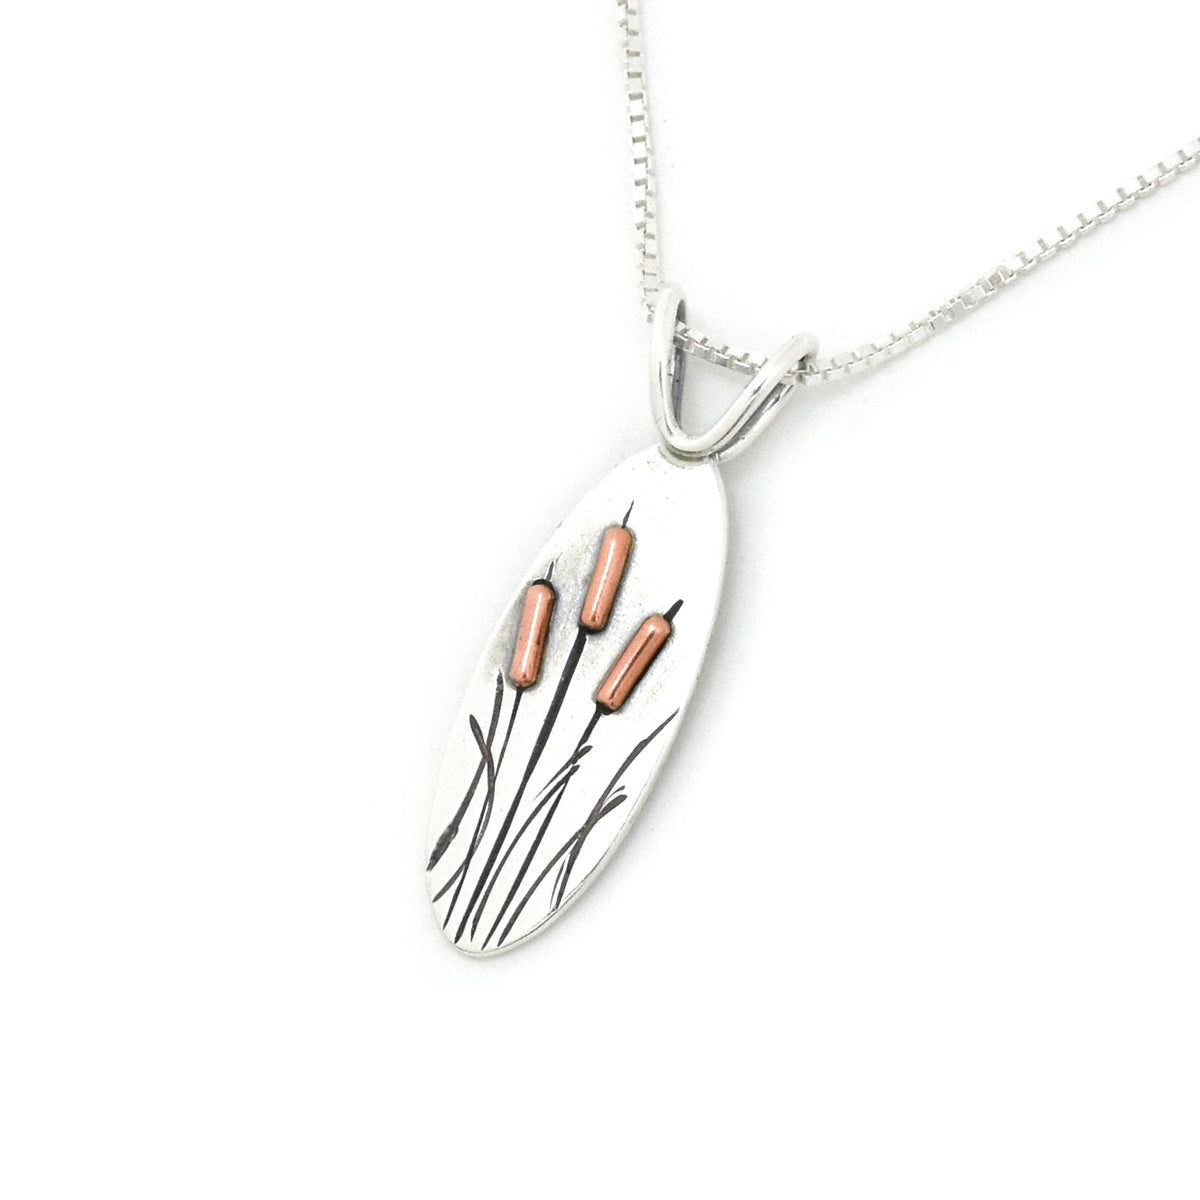 Spring Cattails Pendant - Mixed Metal Pendant   6876 - handmade by Beth Millner Jewelry